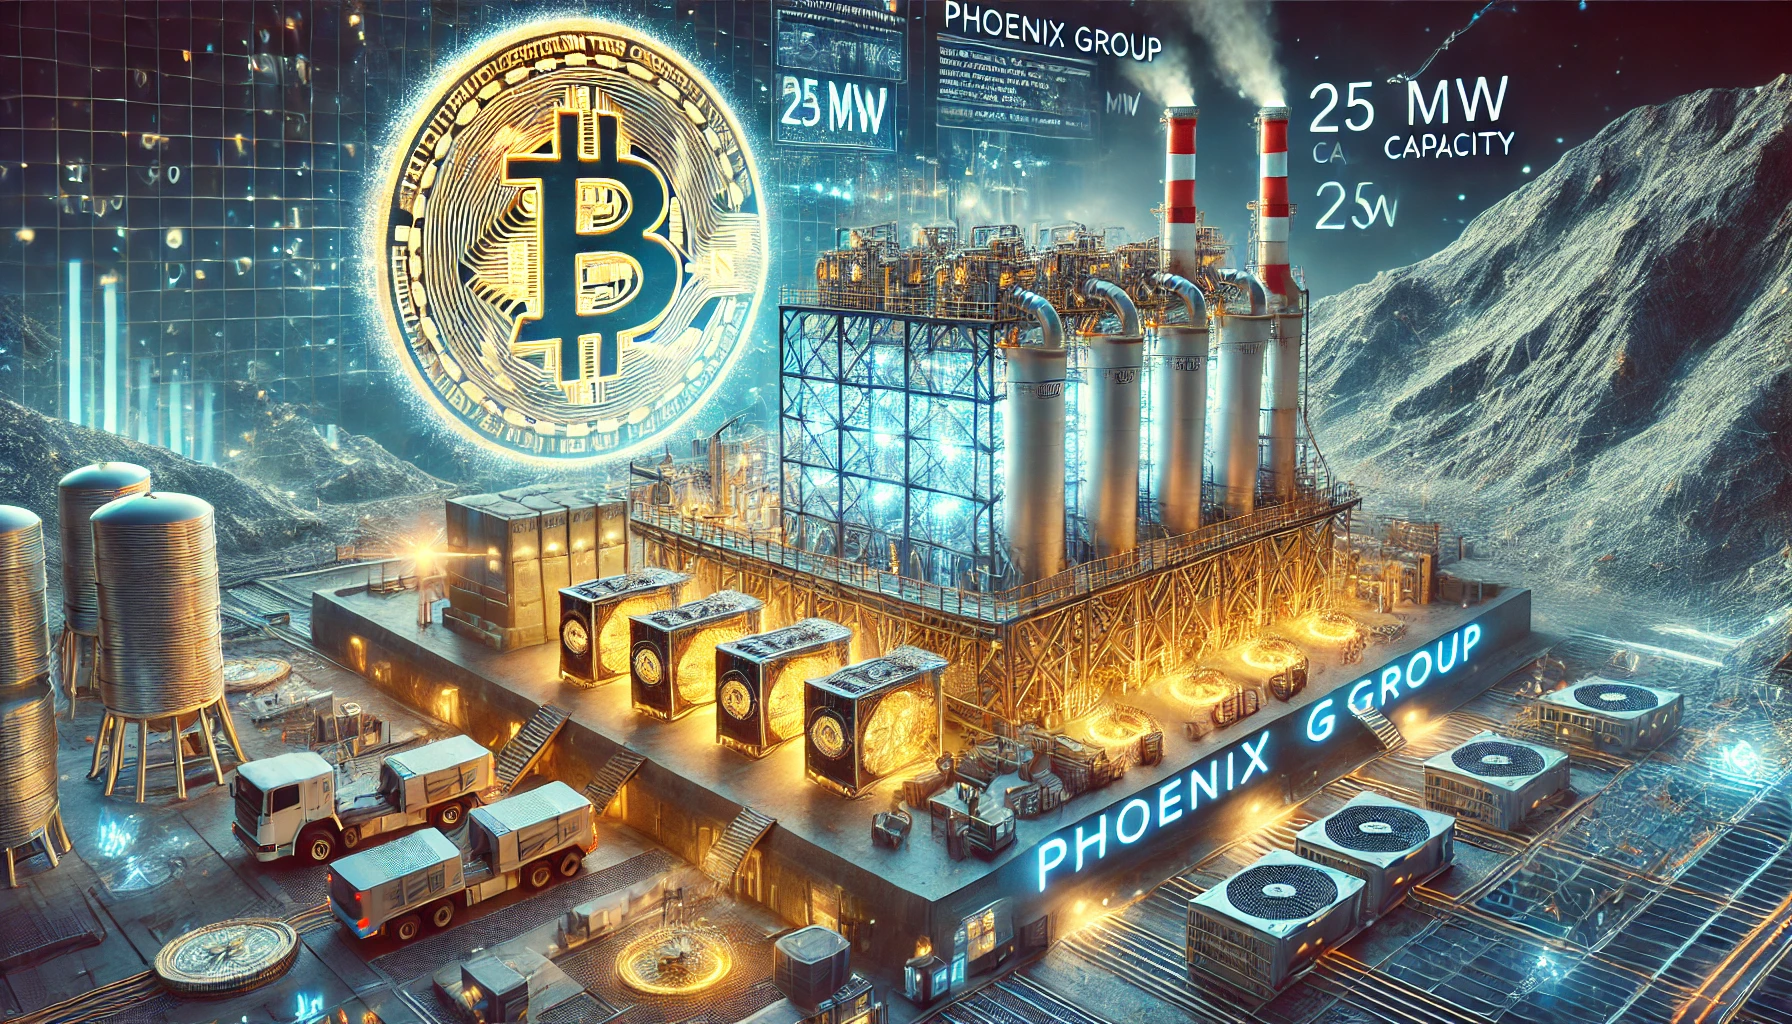 Phoenix Group Announces New 25 MW Bitcoin Mining Facility in the U.S.